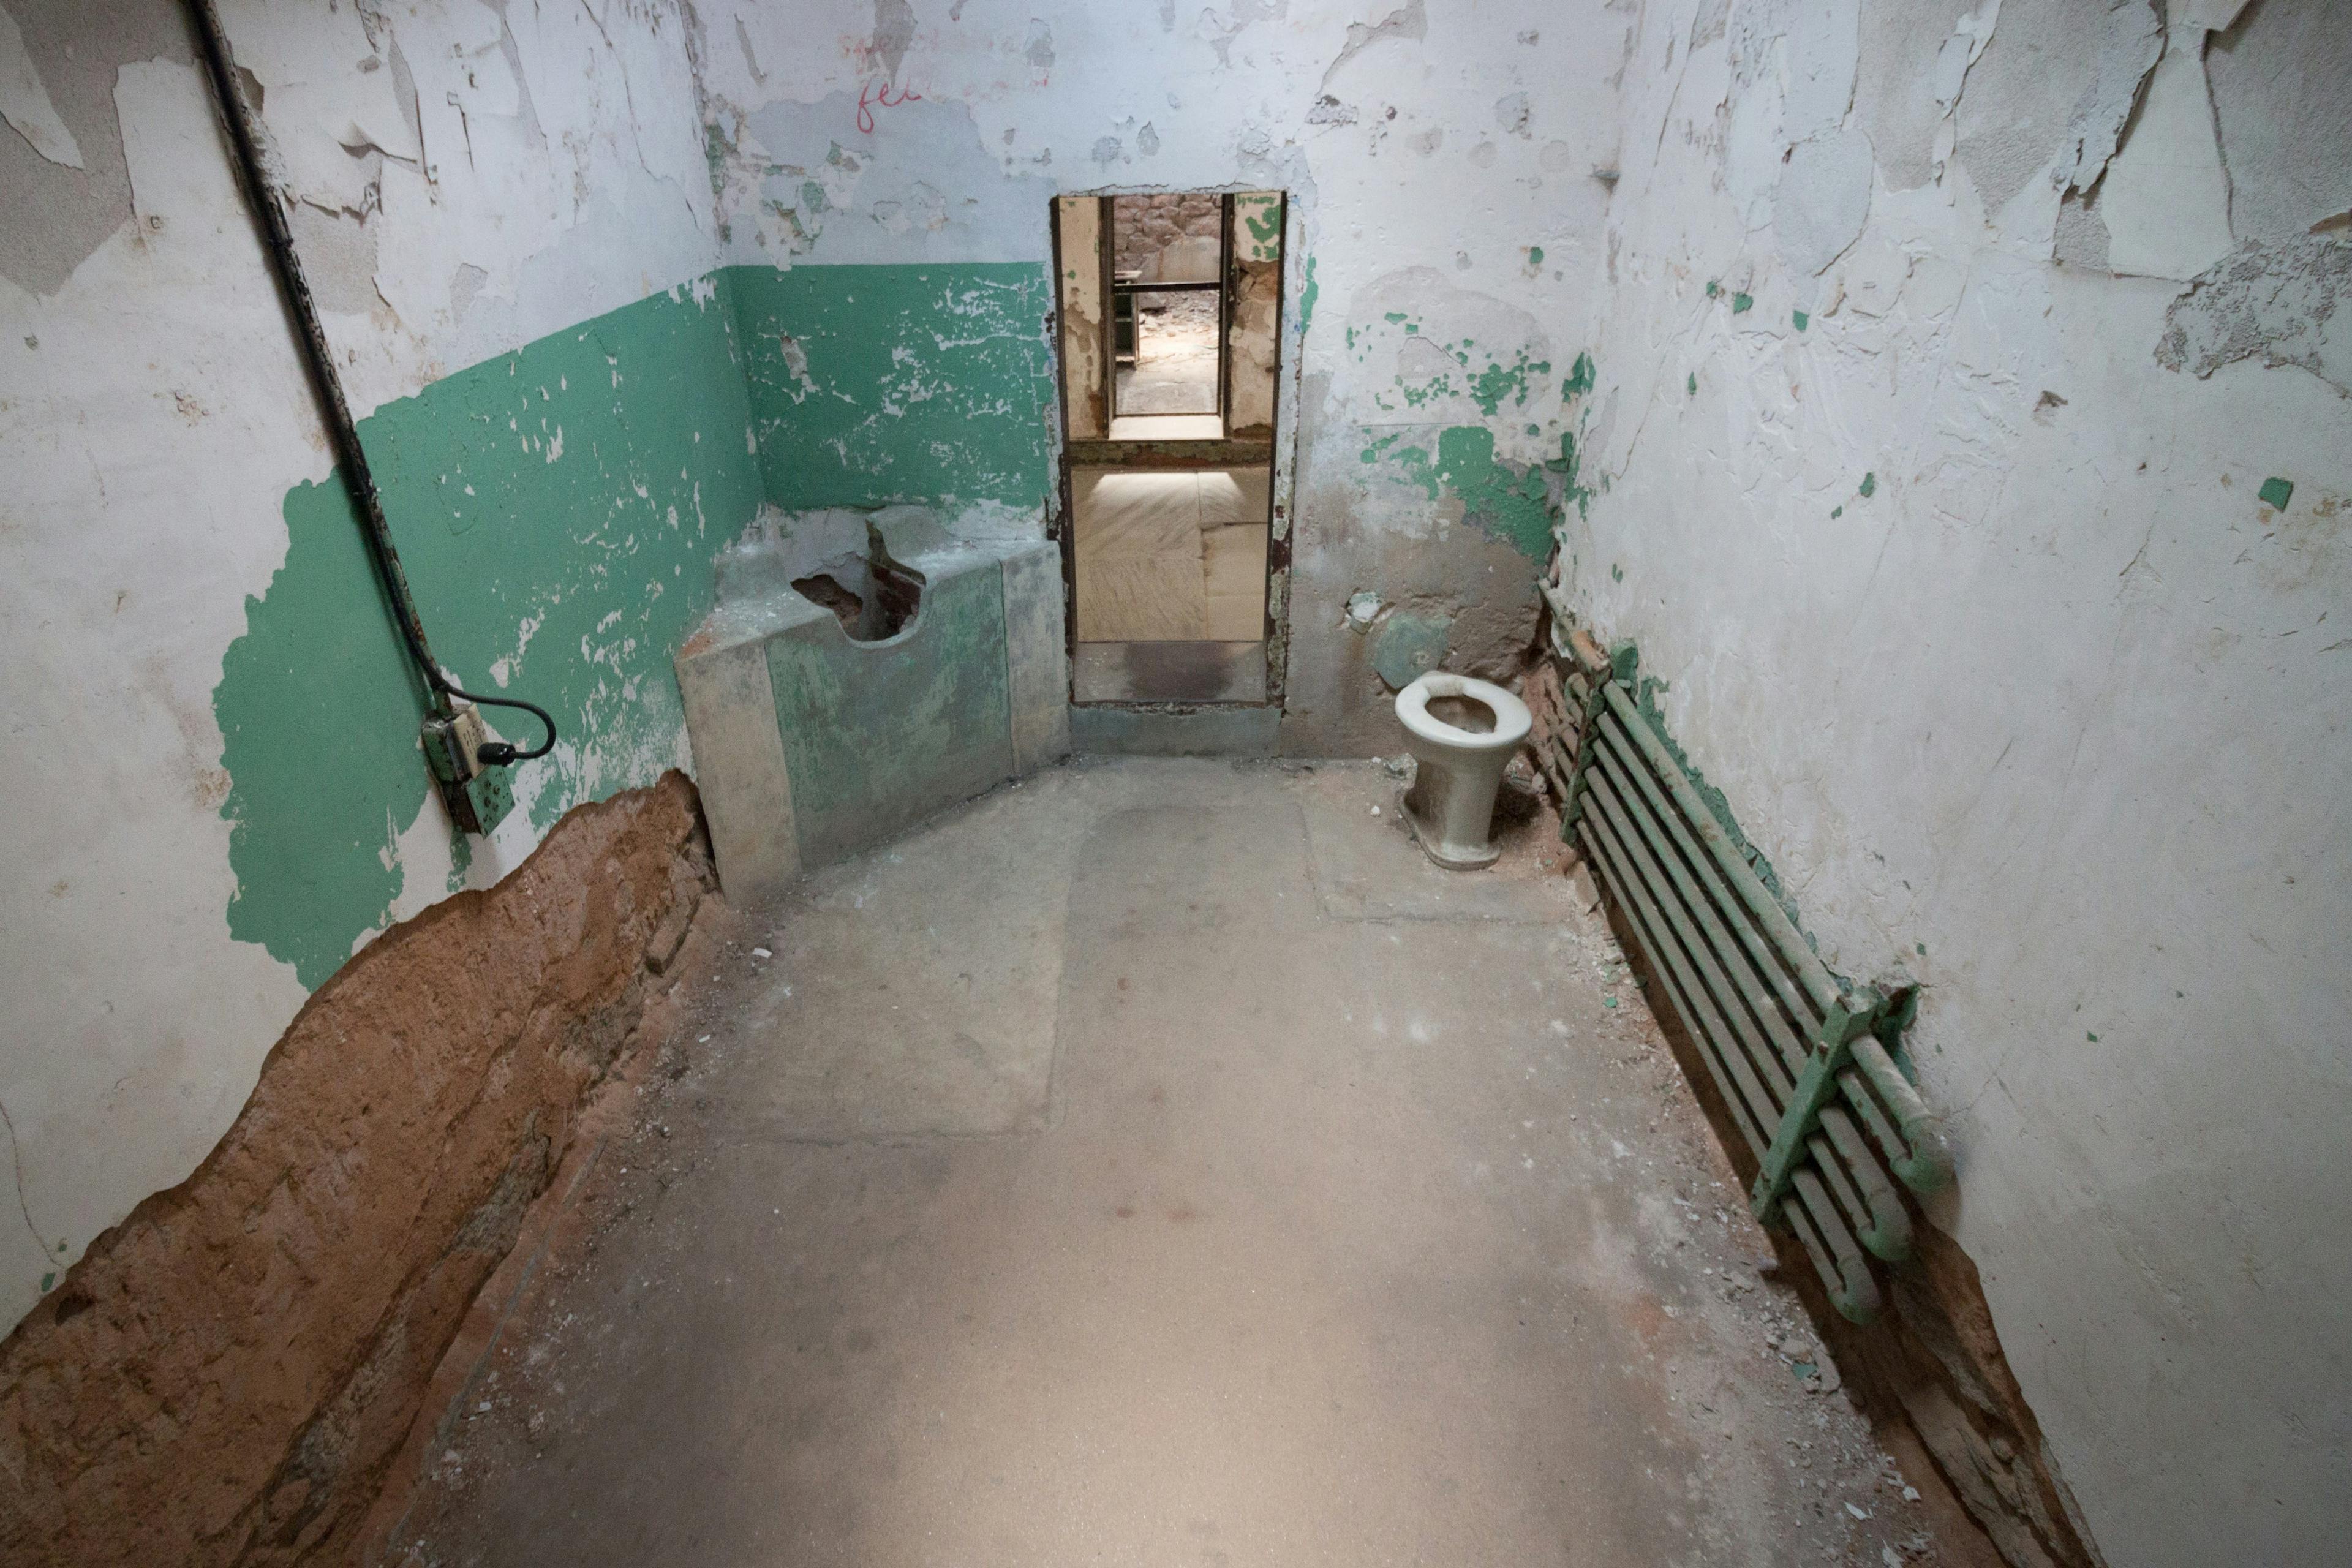 A cell in Eastern State Penitentiary in Philadelphia.